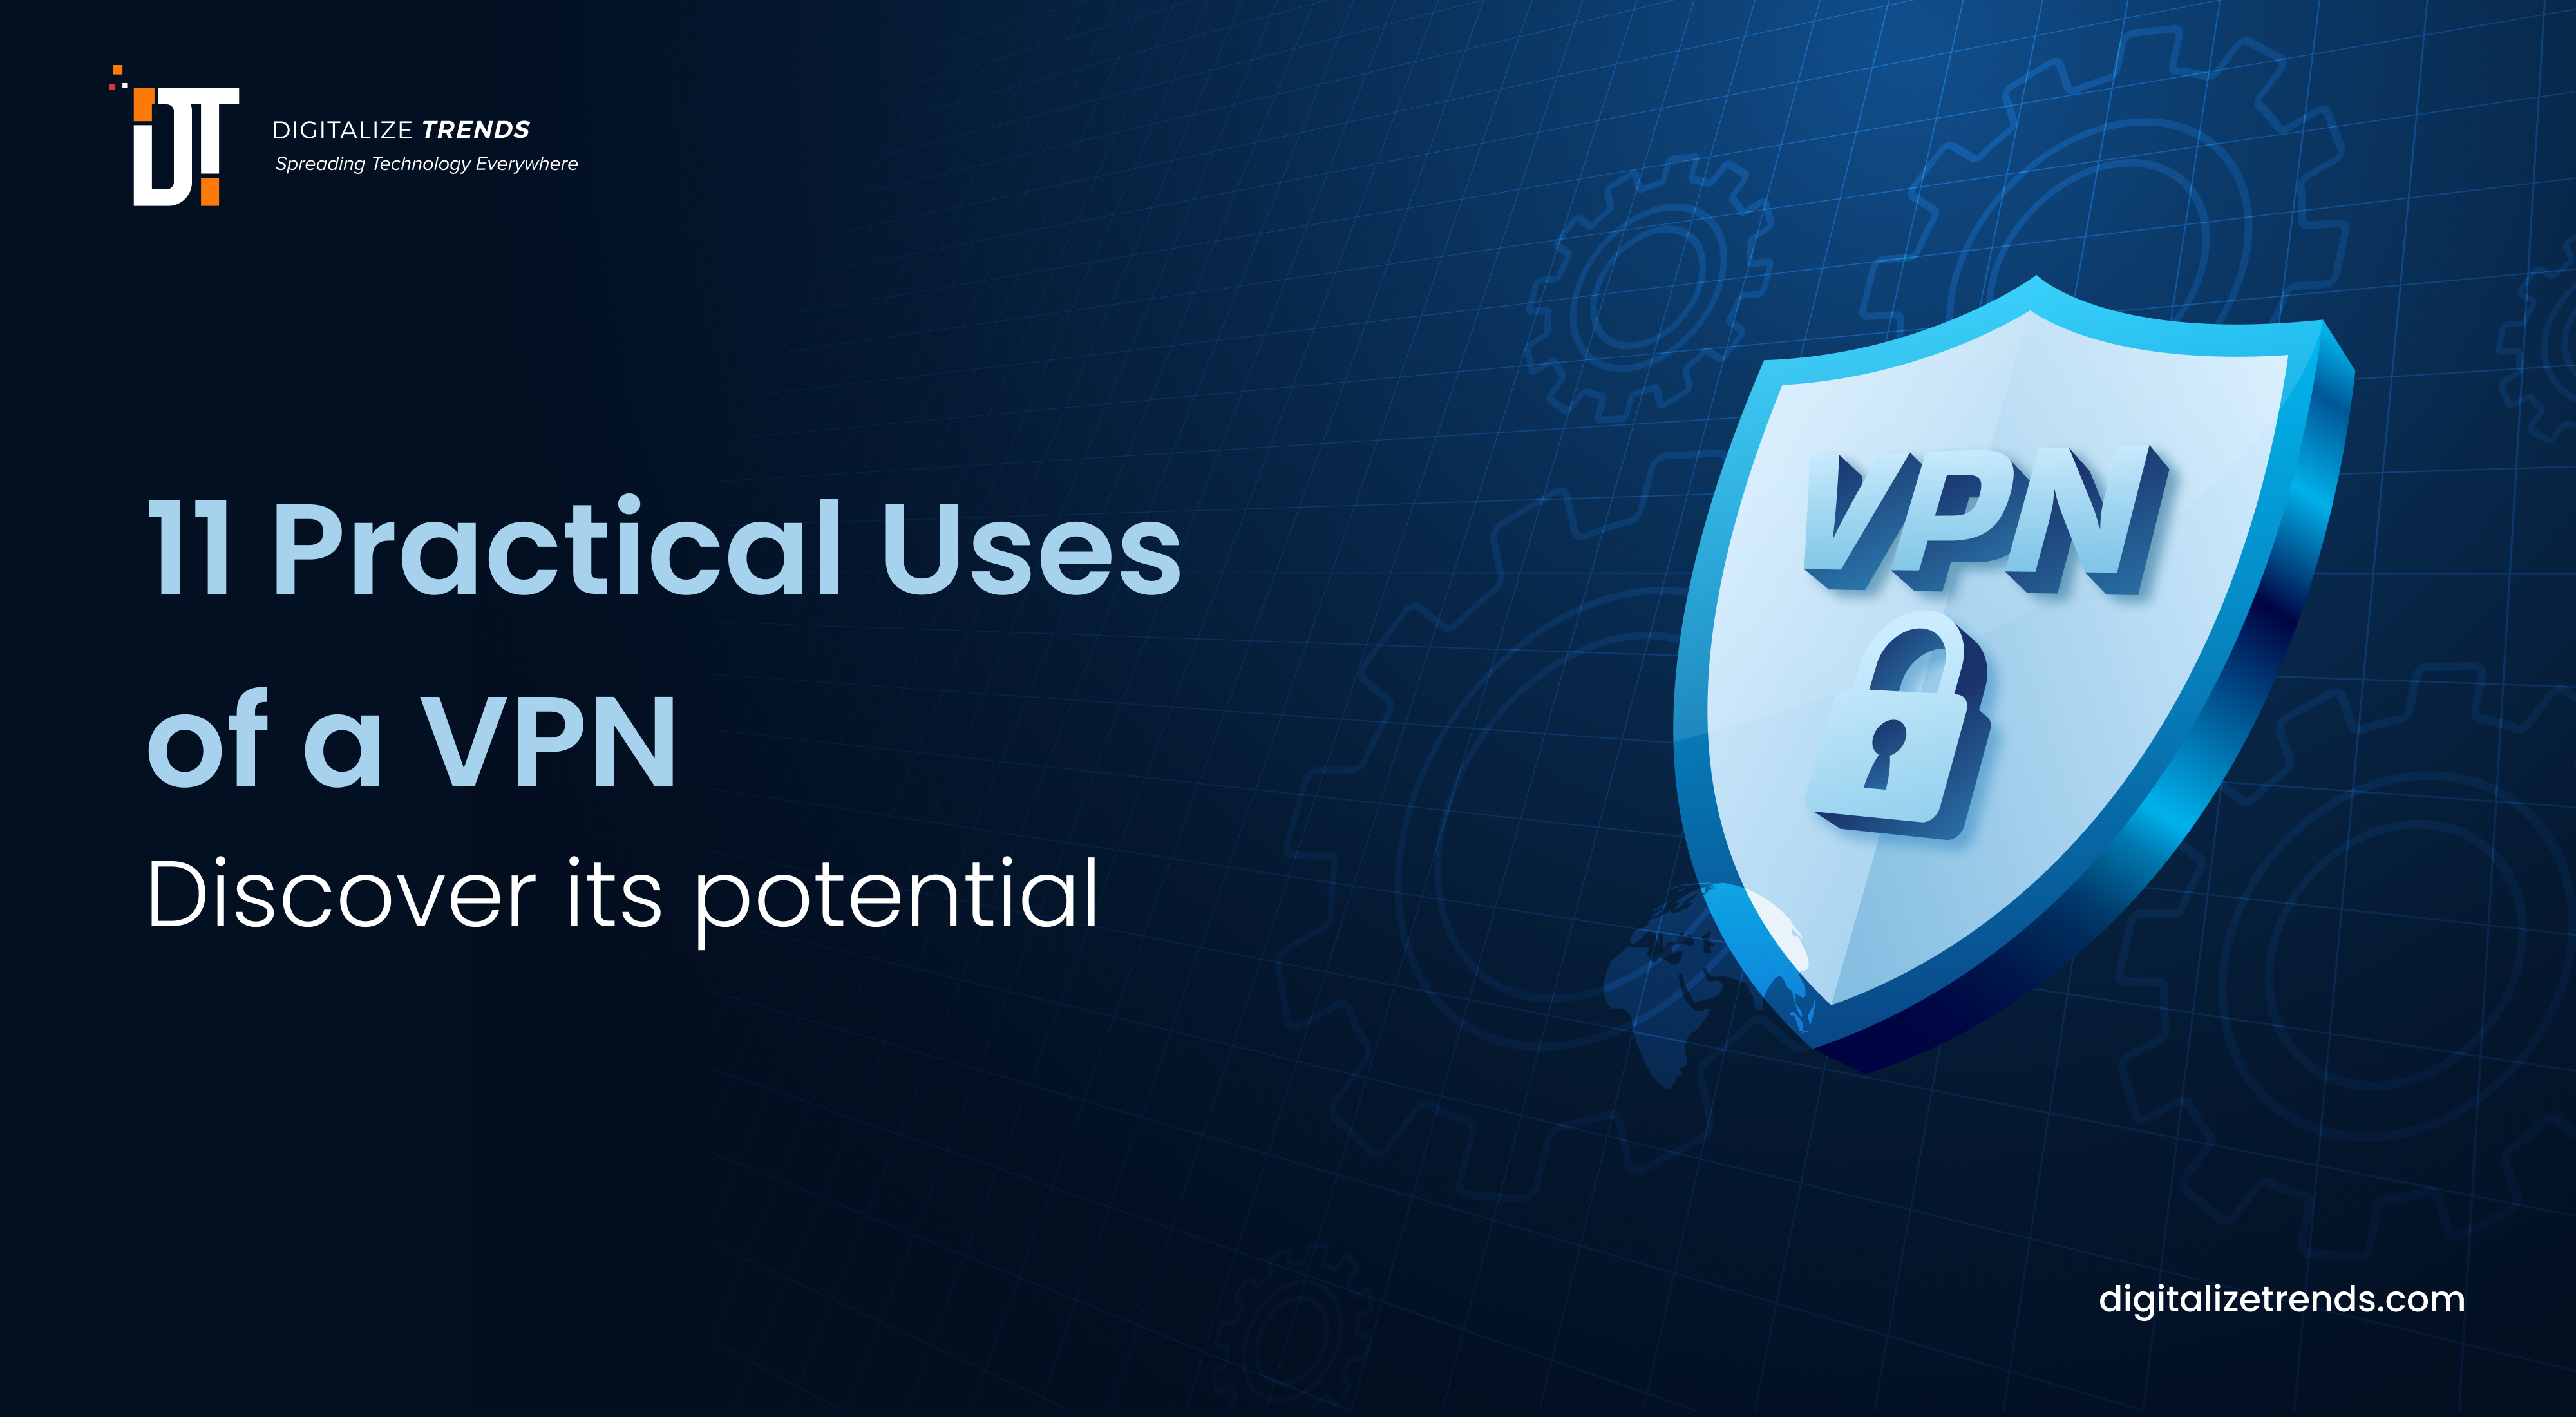 11 Practical Uses of a VPN - Discover its potential